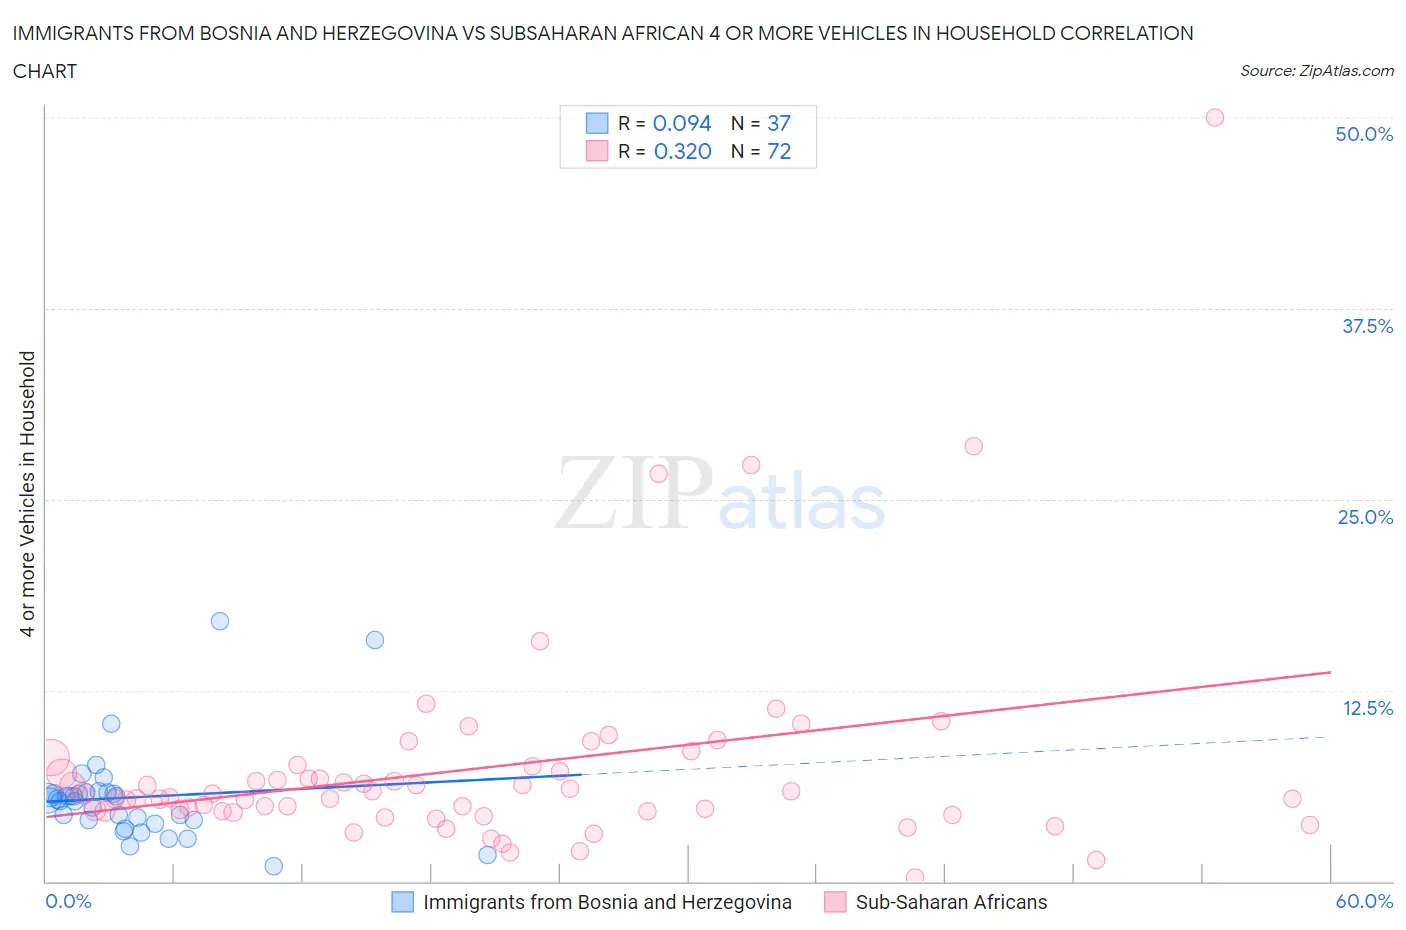 Immigrants from Bosnia and Herzegovina vs Subsaharan African 4 or more Vehicles in Household